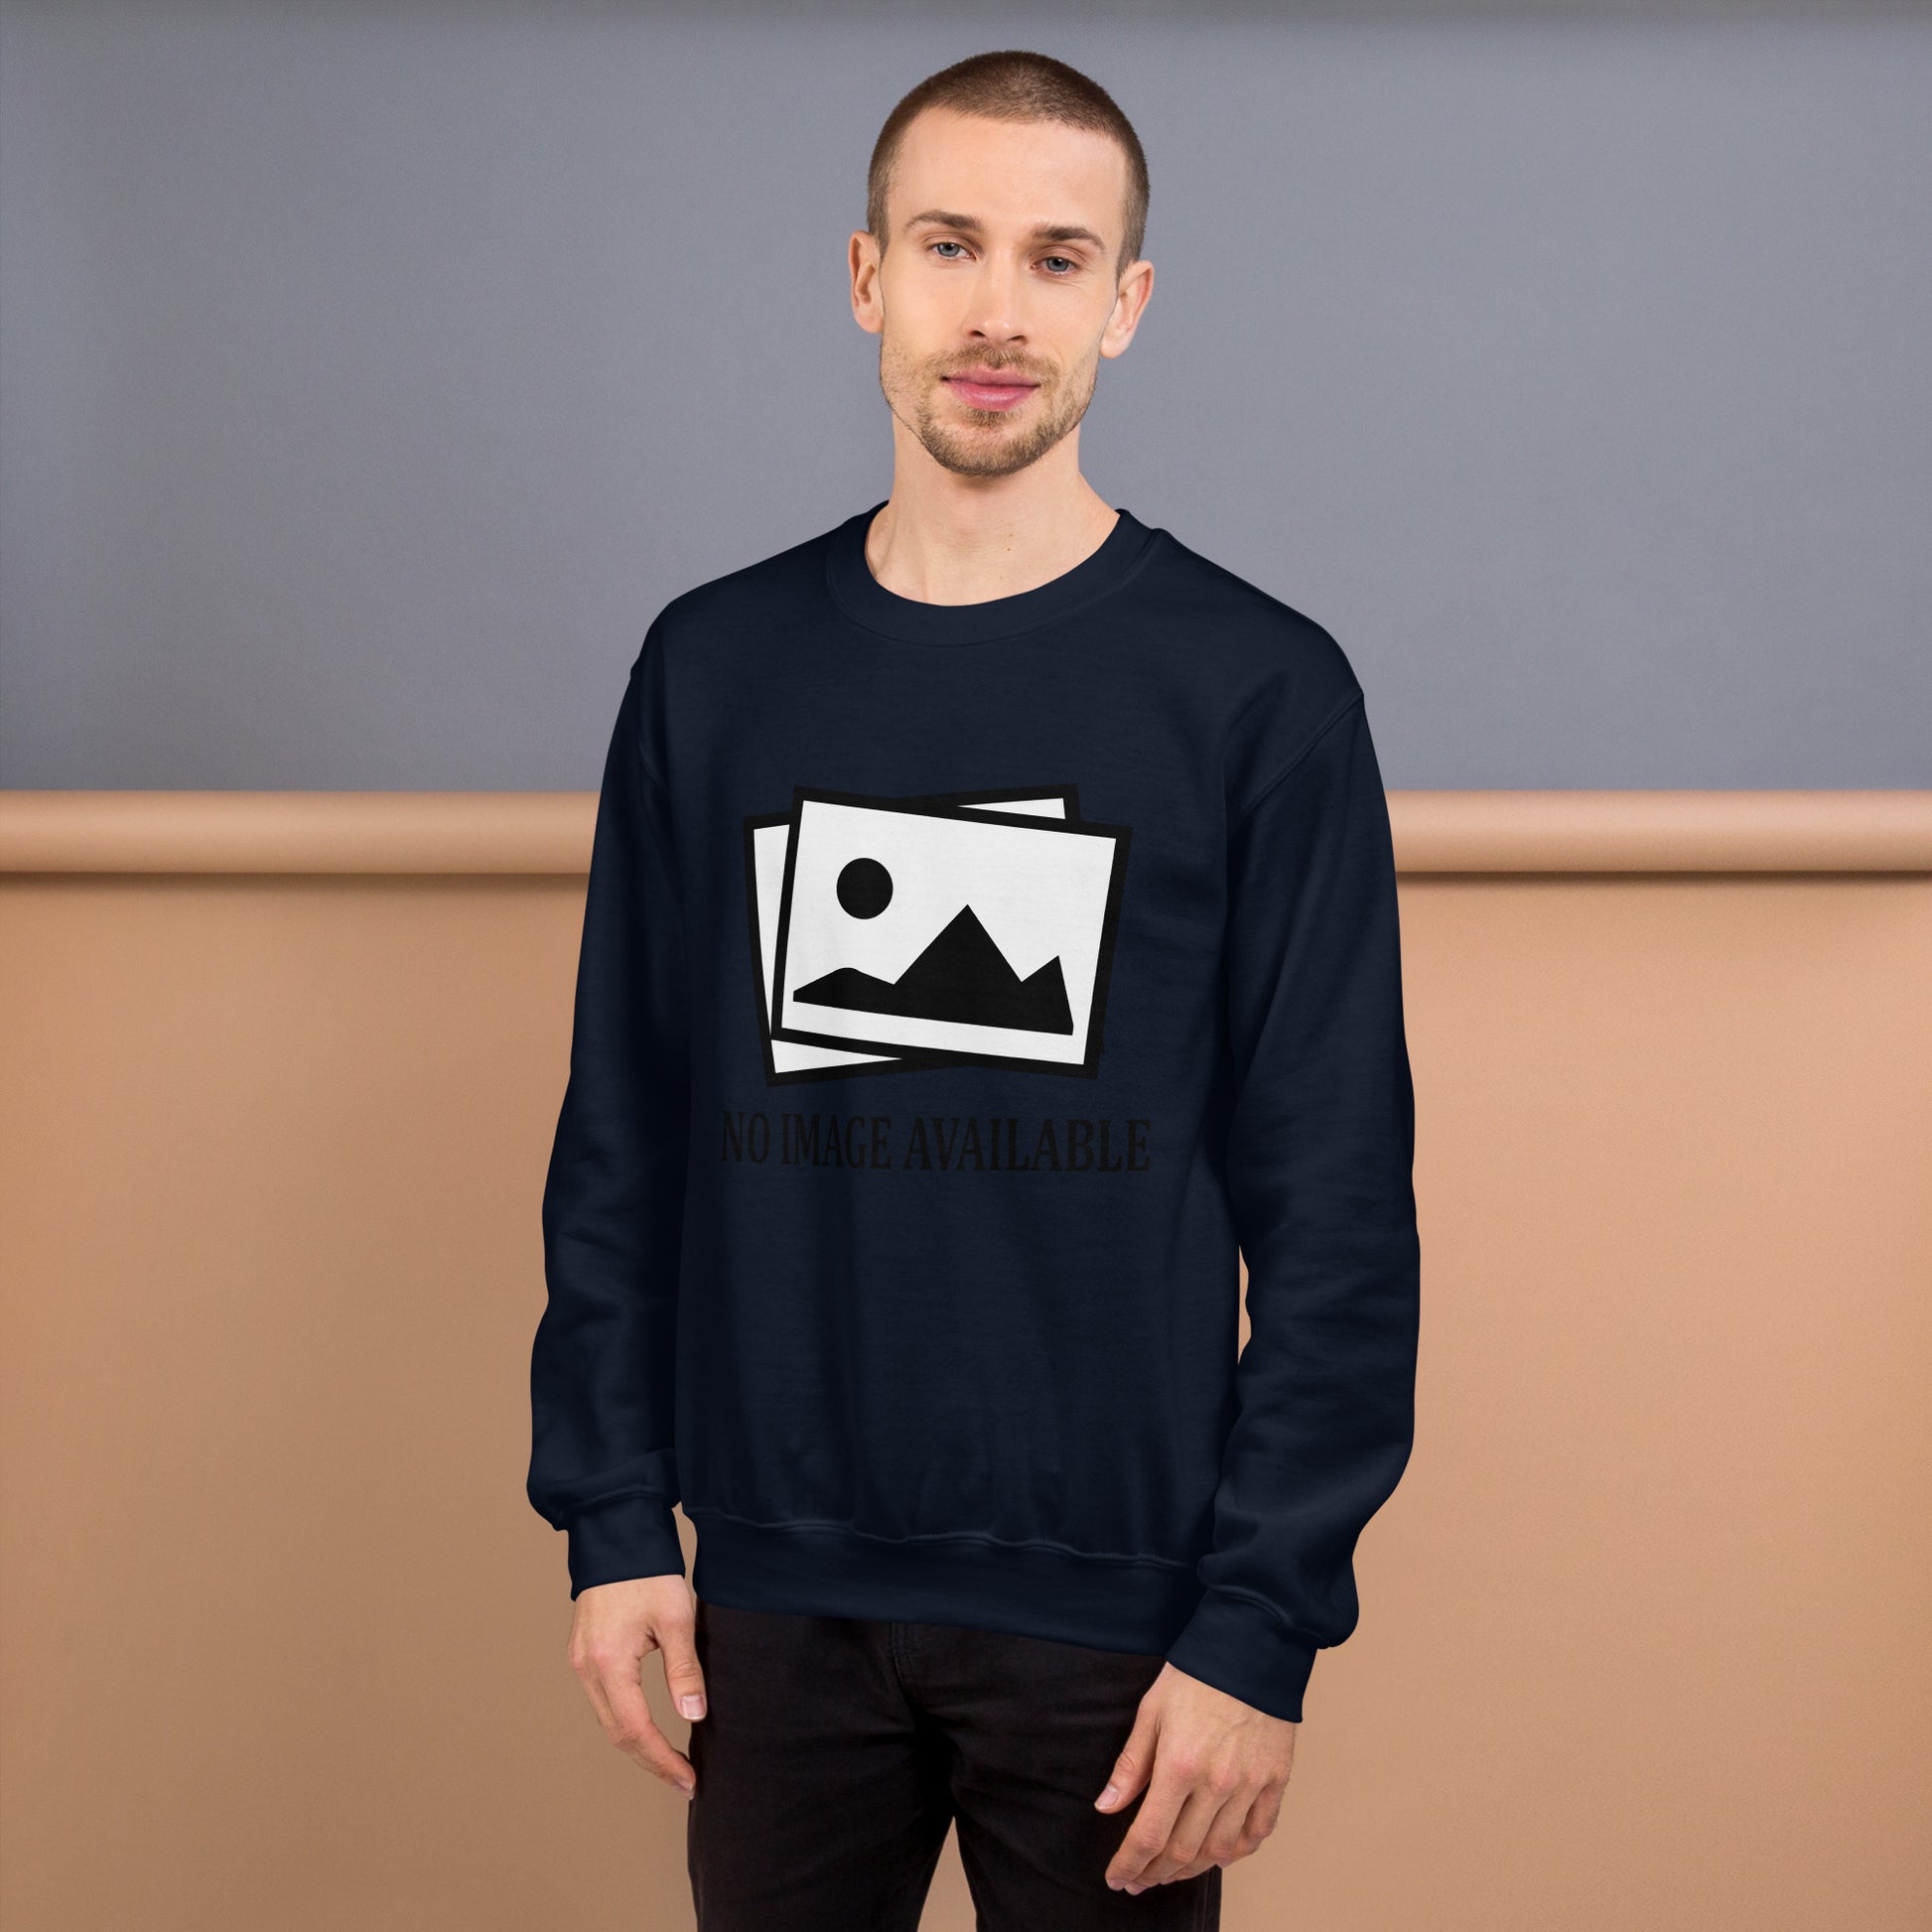 Men with black sweatshirt with image and text "no image available"